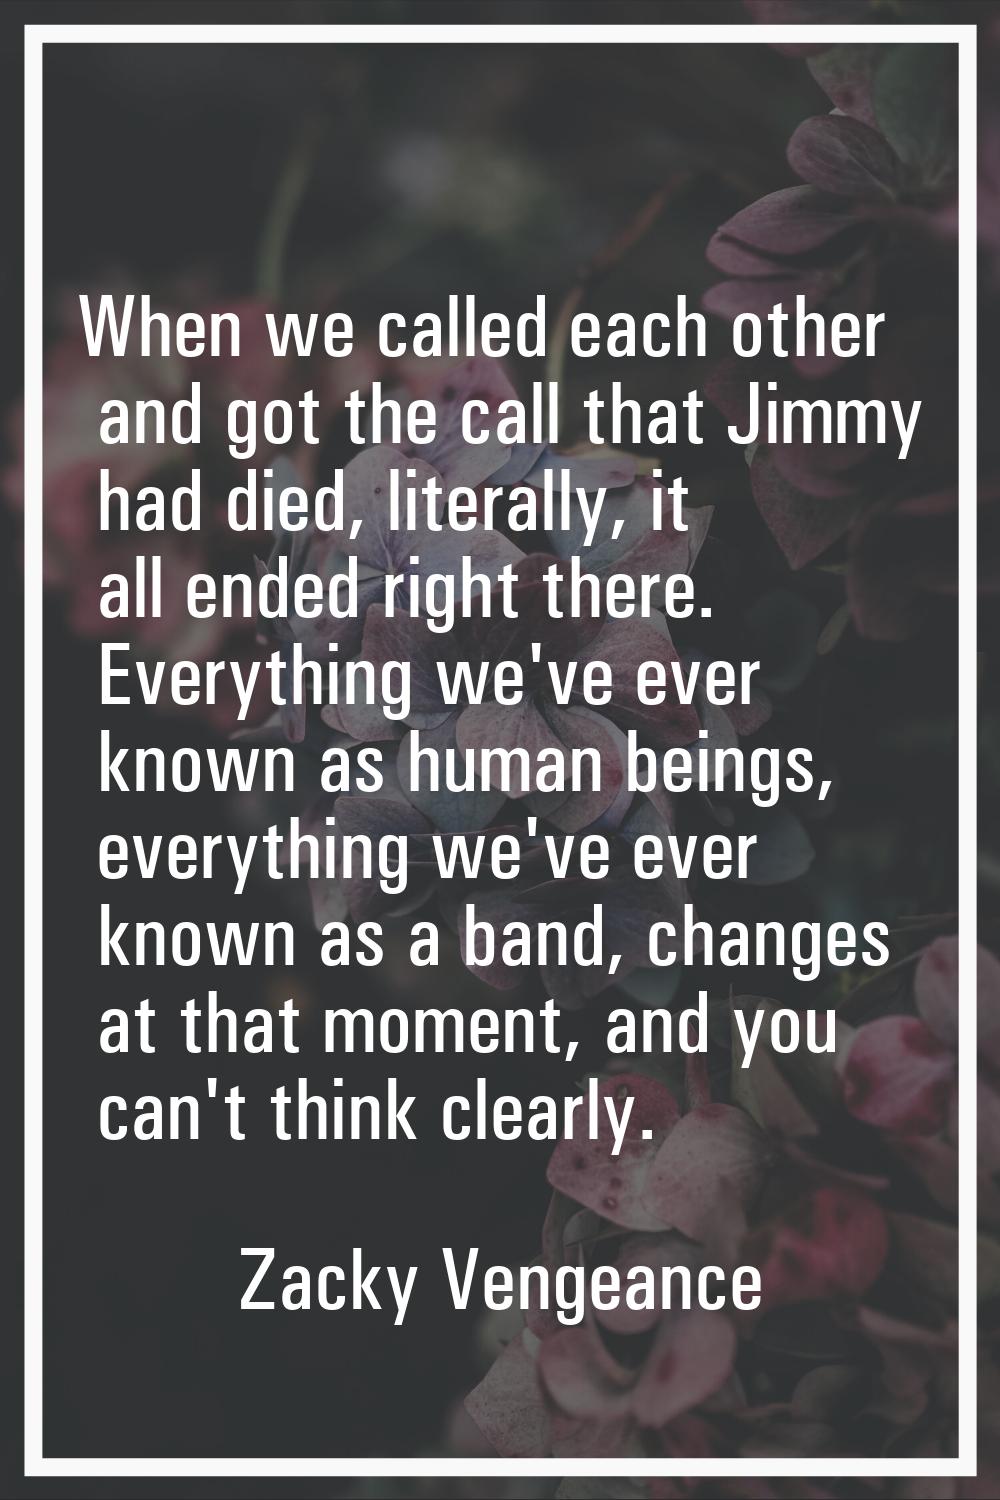 When we called each other and got the call that Jimmy had died, literally, it all ended right there